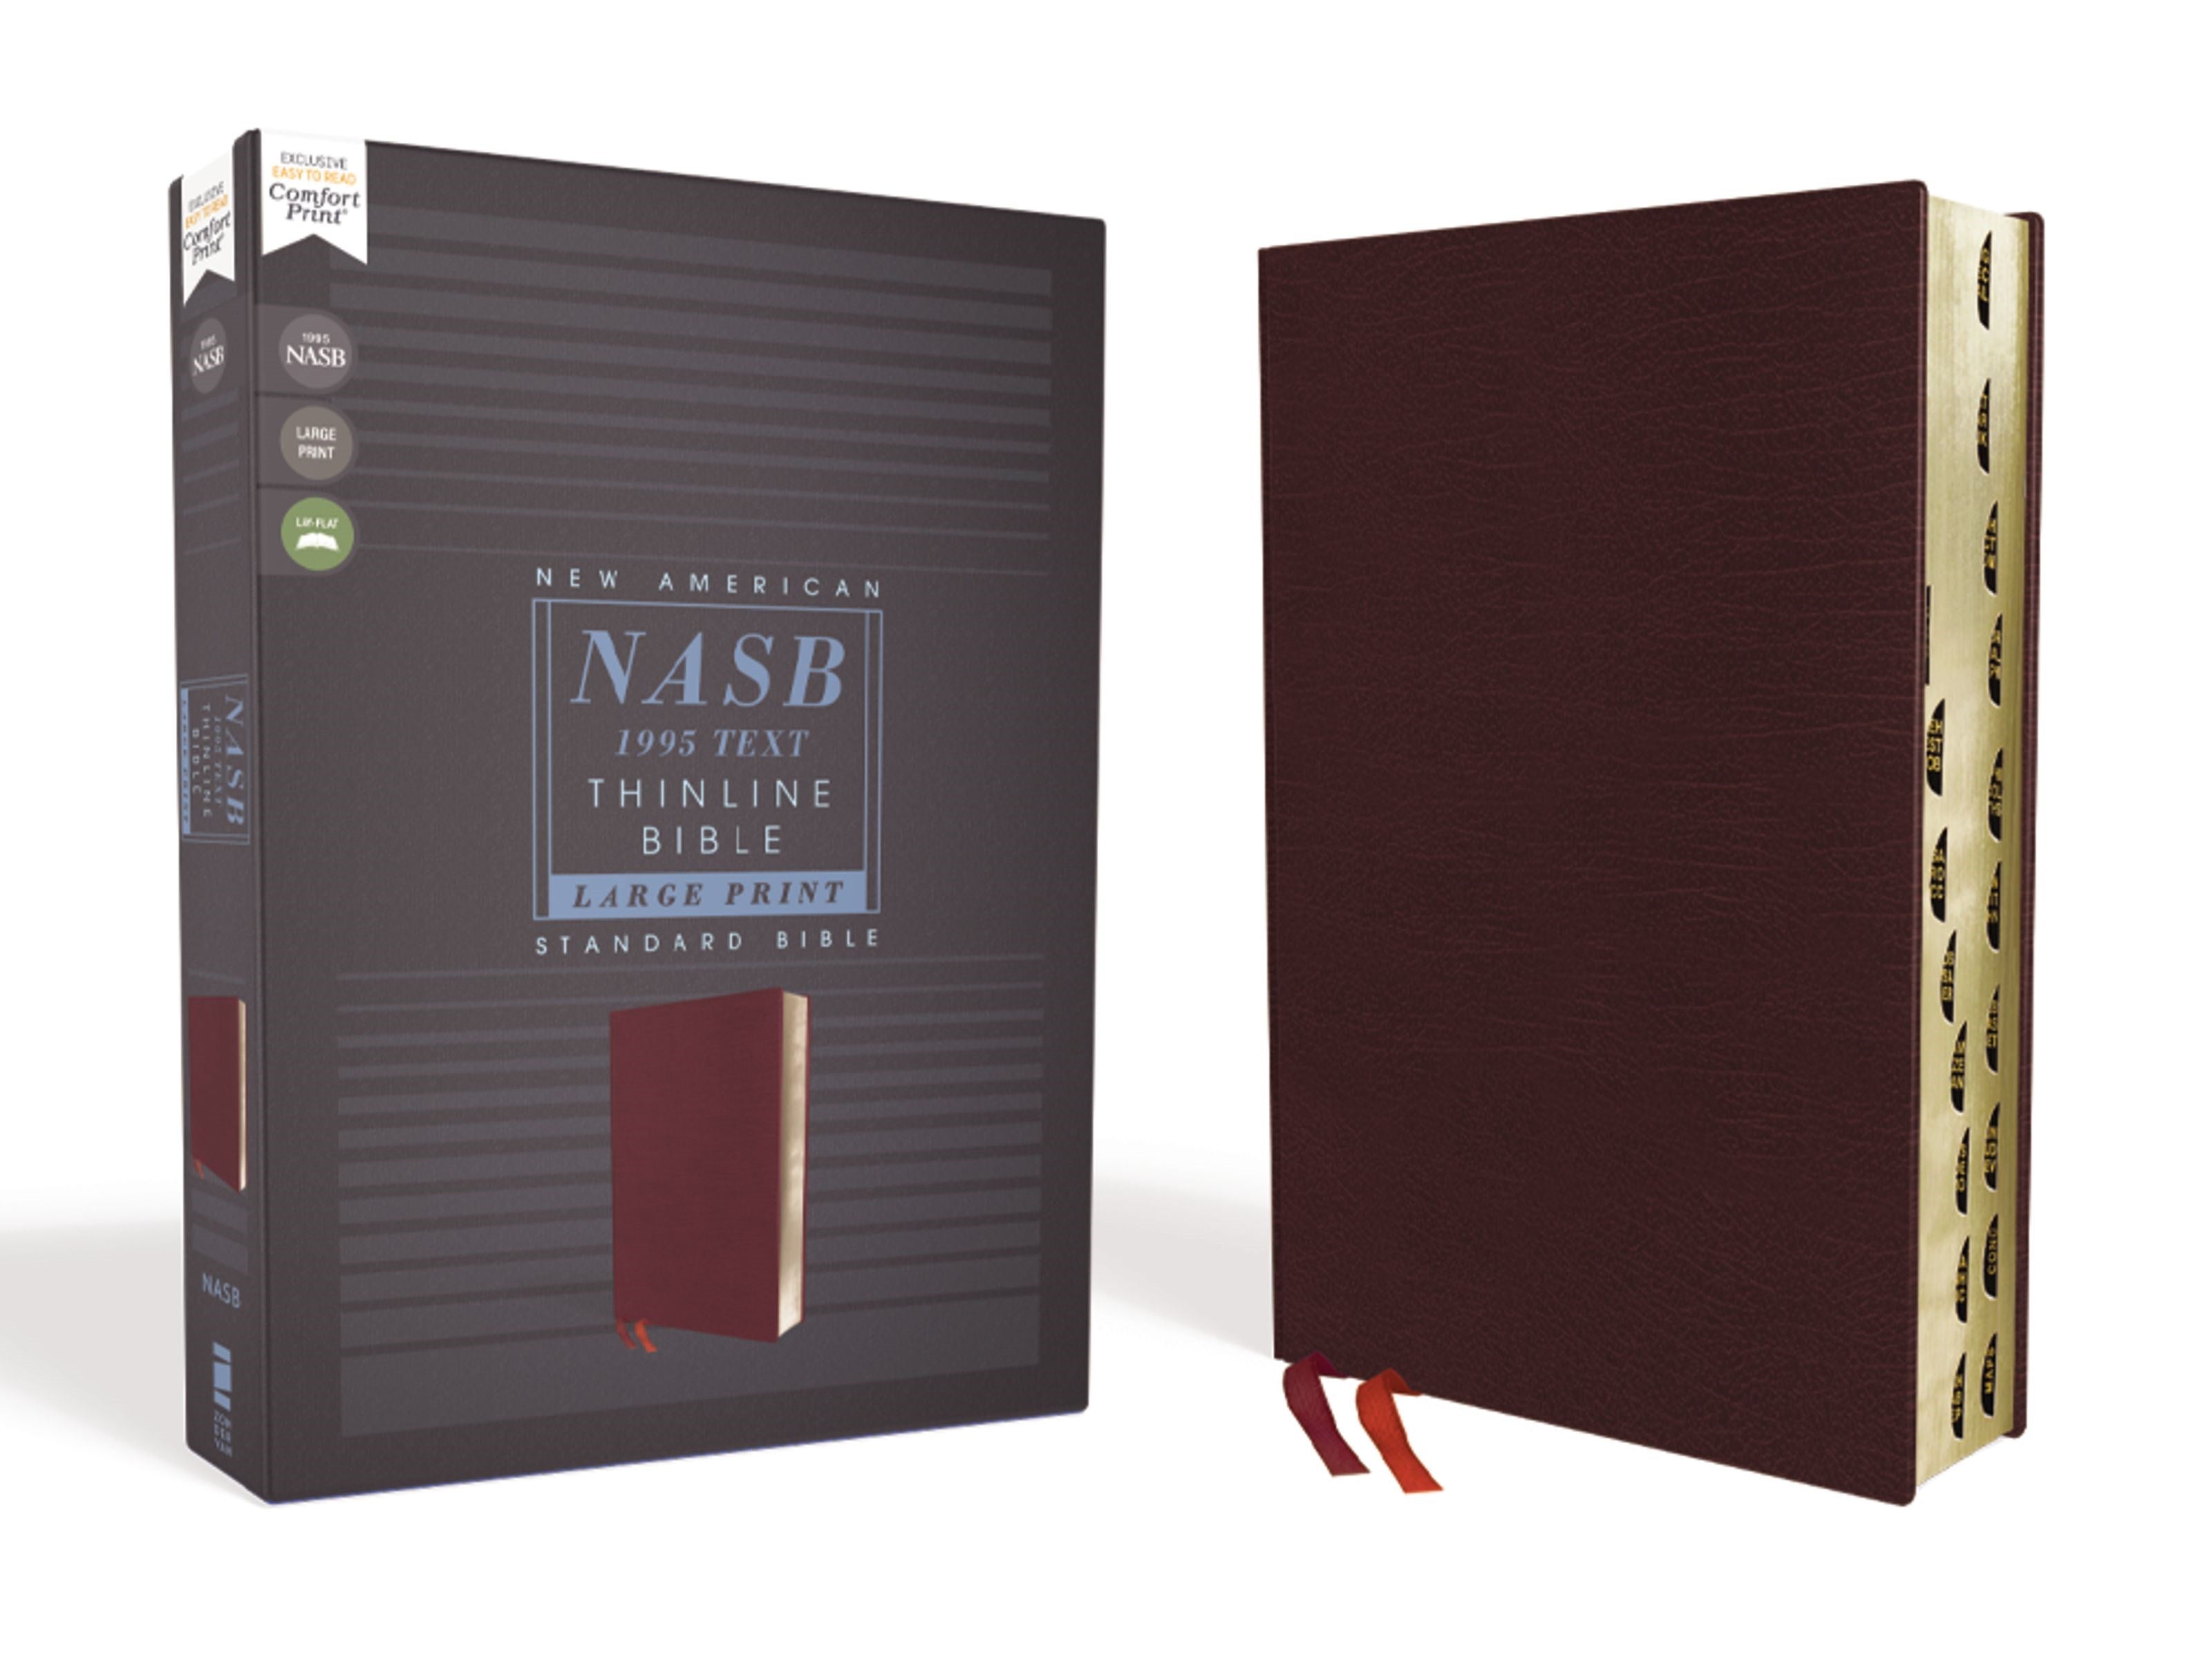 NASB, Thinline Bible, Large Print, Bonded Leather, Burgundy, Red Letter, 1995 Text, Thumb Indexed, Comfort Print  (Large type / large print)